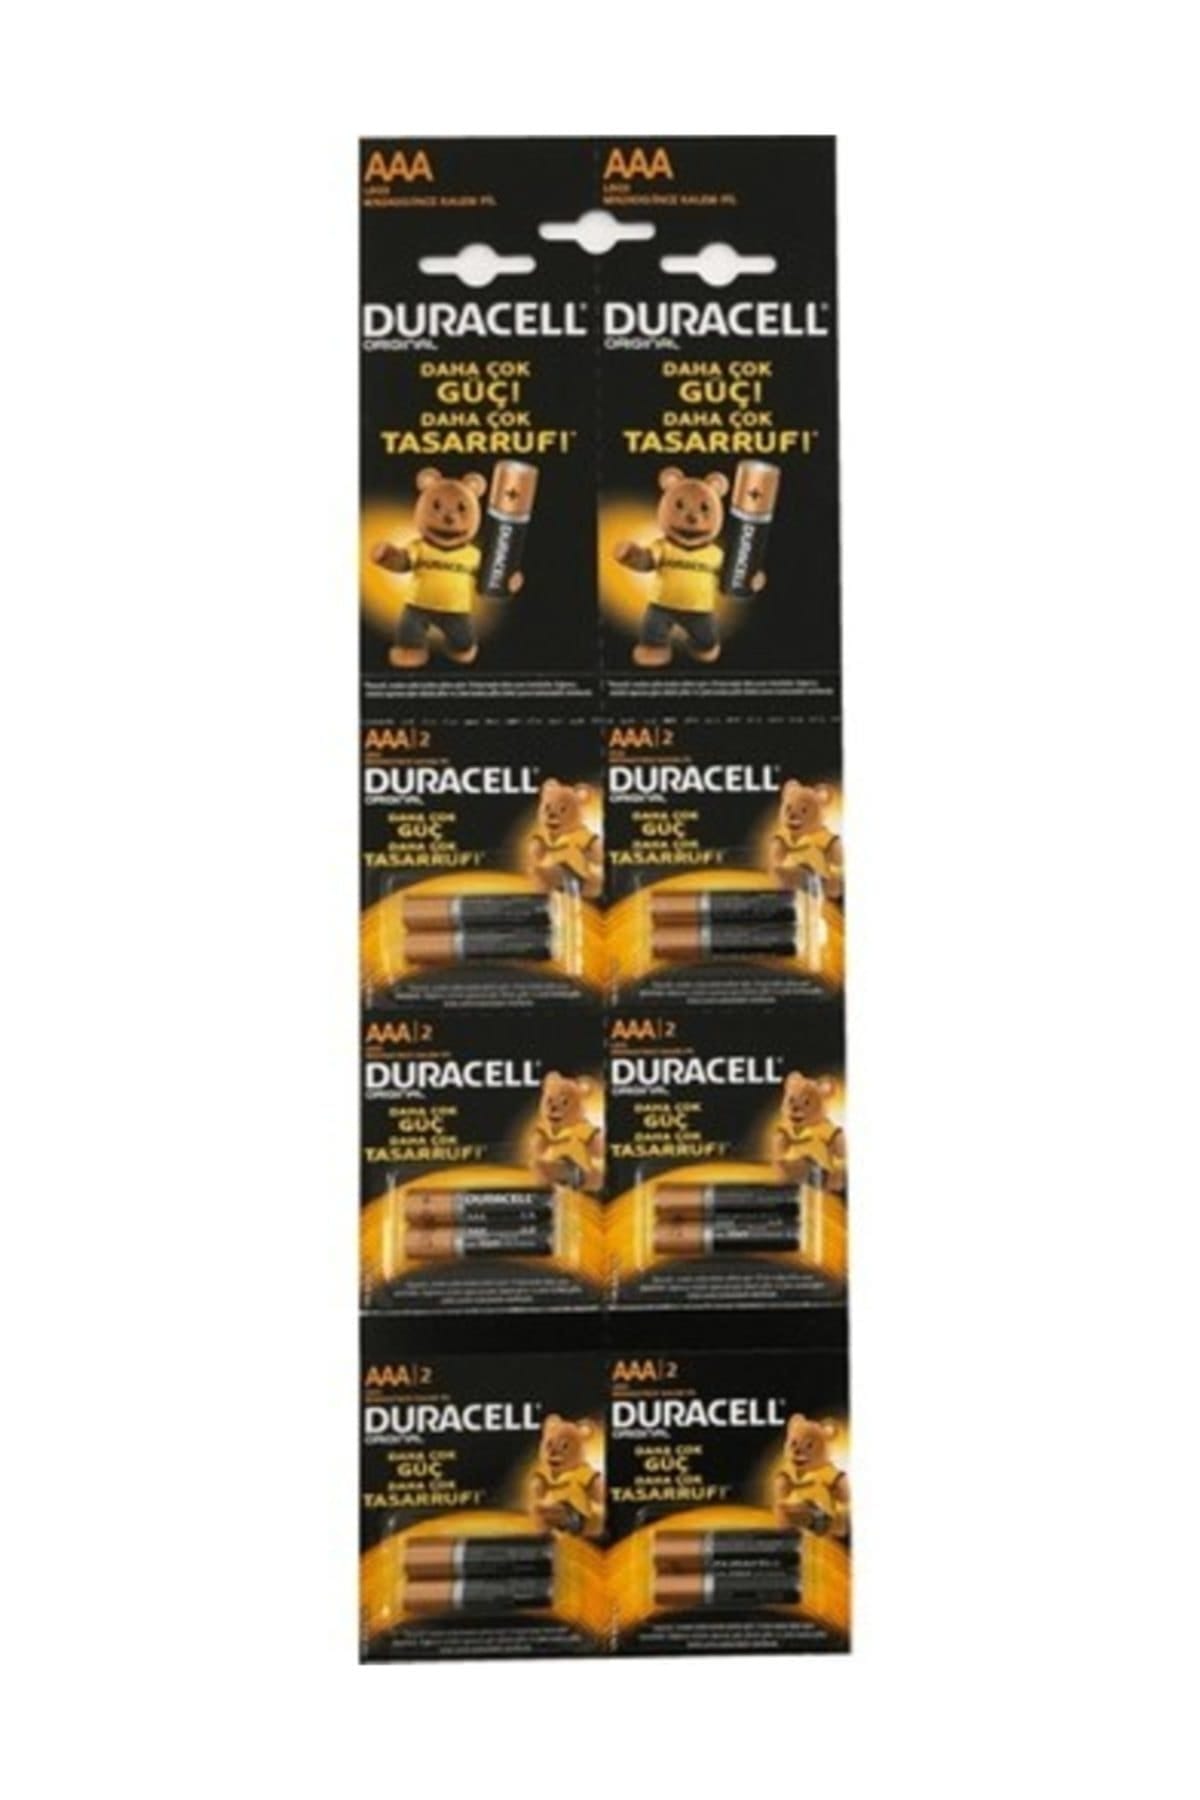 Duracell Hbdc Color Chart Aaa 2-Pack Of 6 12 pc